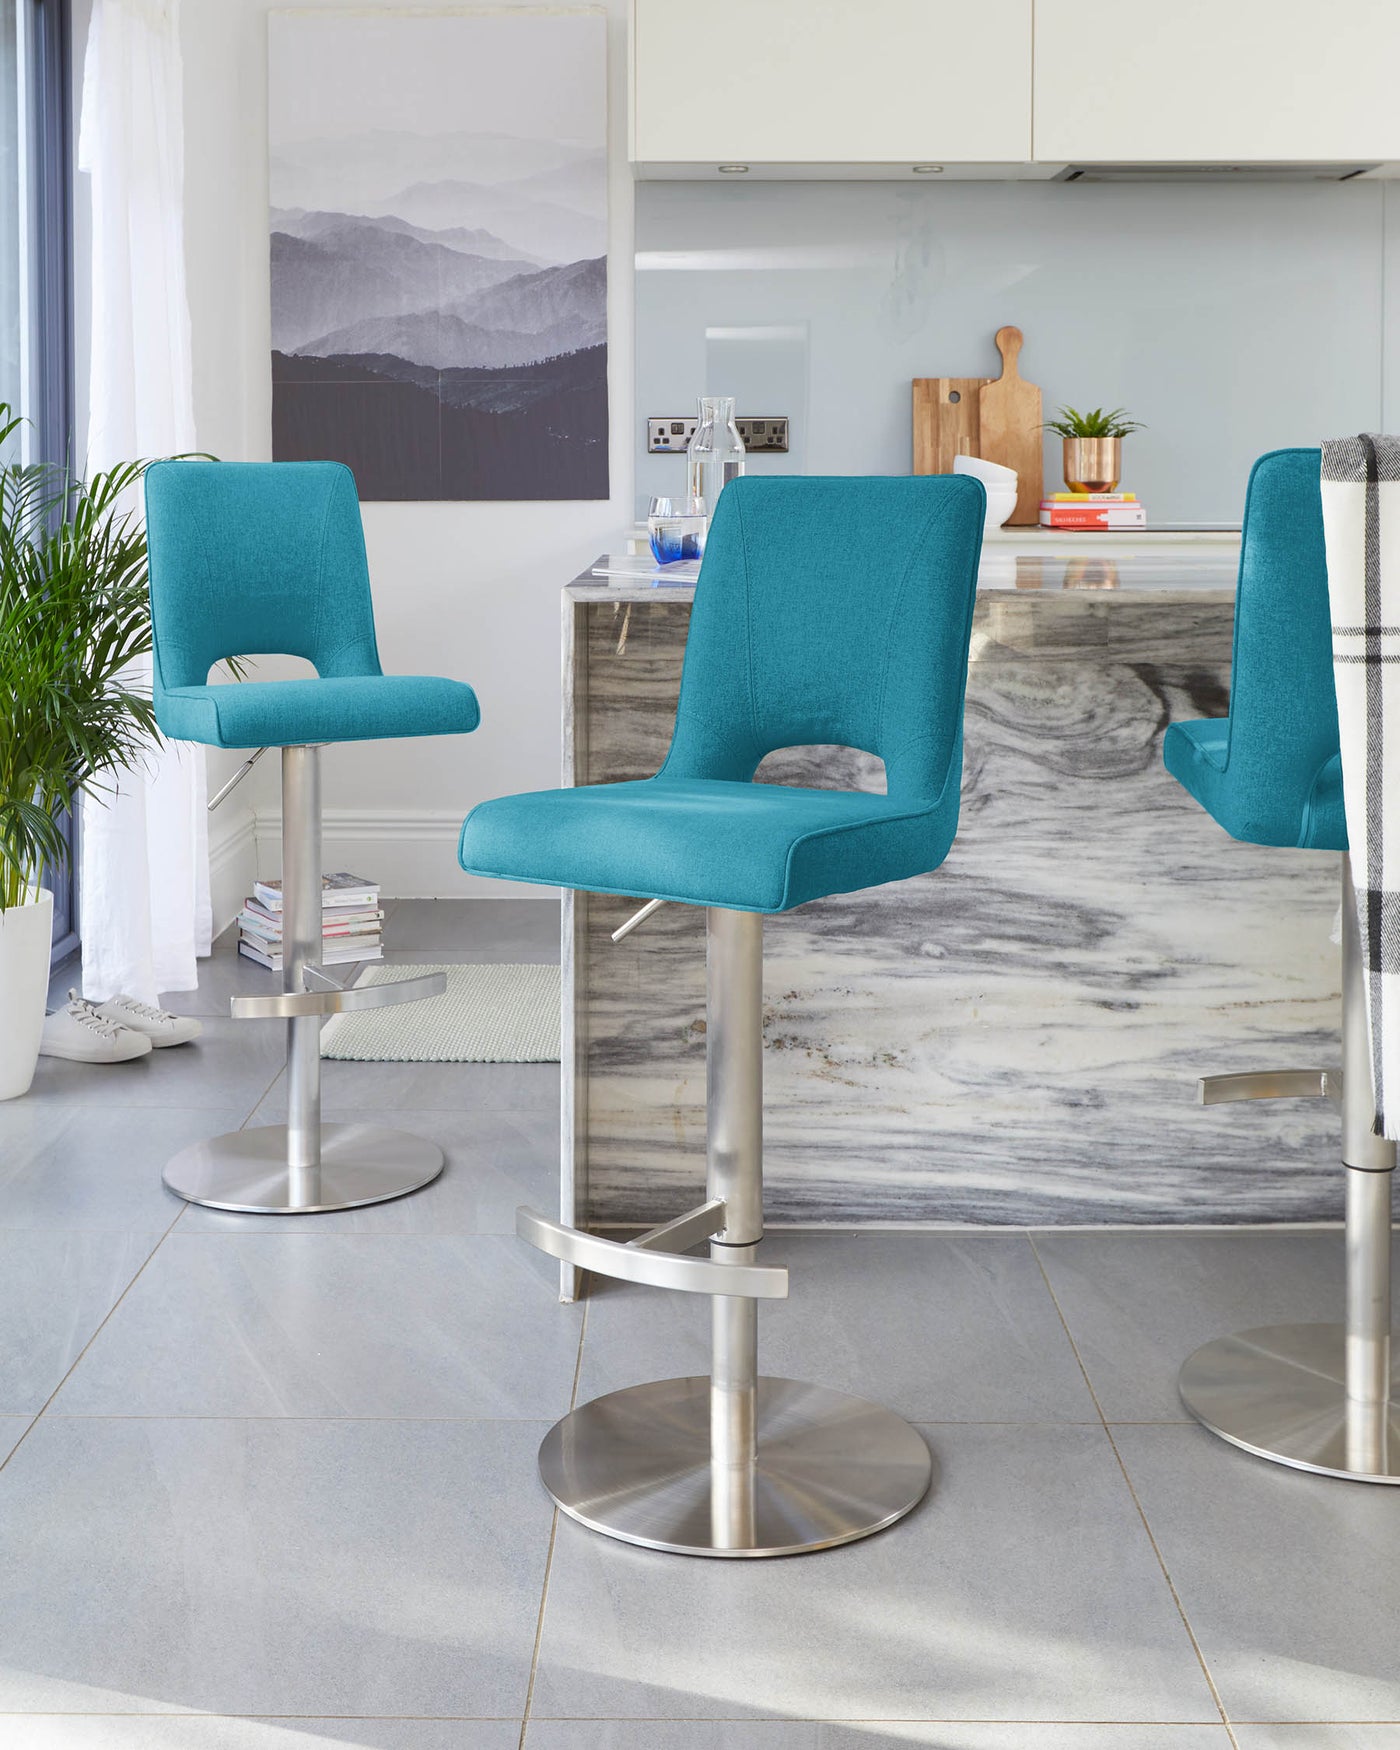 Teal blue contemporary bar stools with backrests, cushioned seats, and footrests on sleek, adjustable stainless steel pedestals.